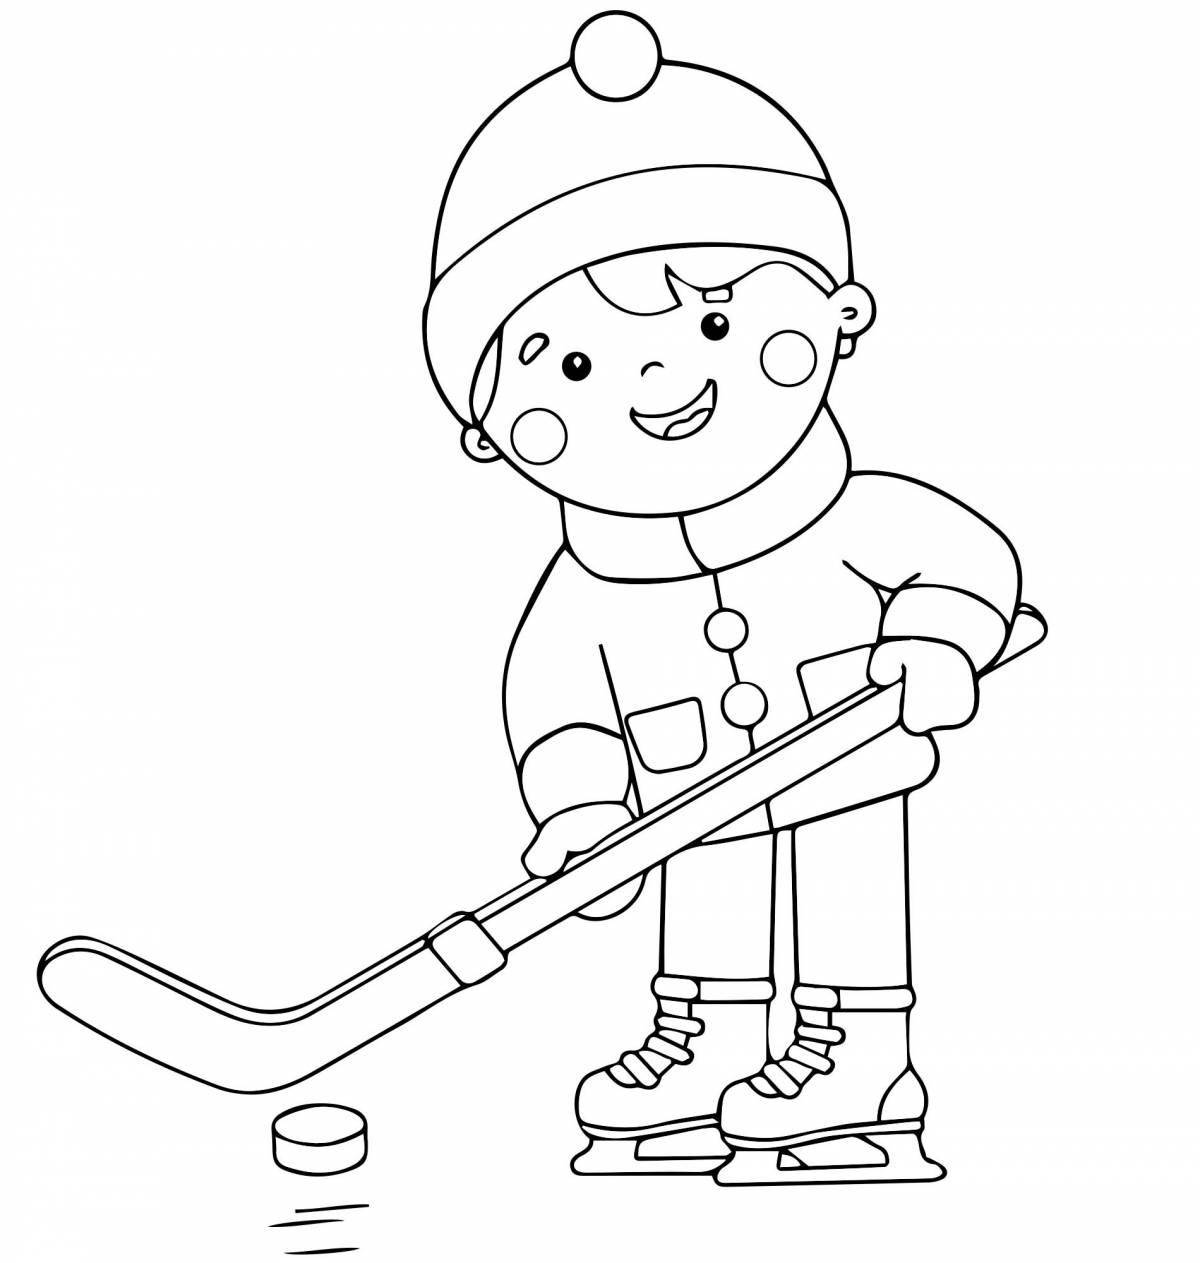 Glitter coloring book for kids winter sports